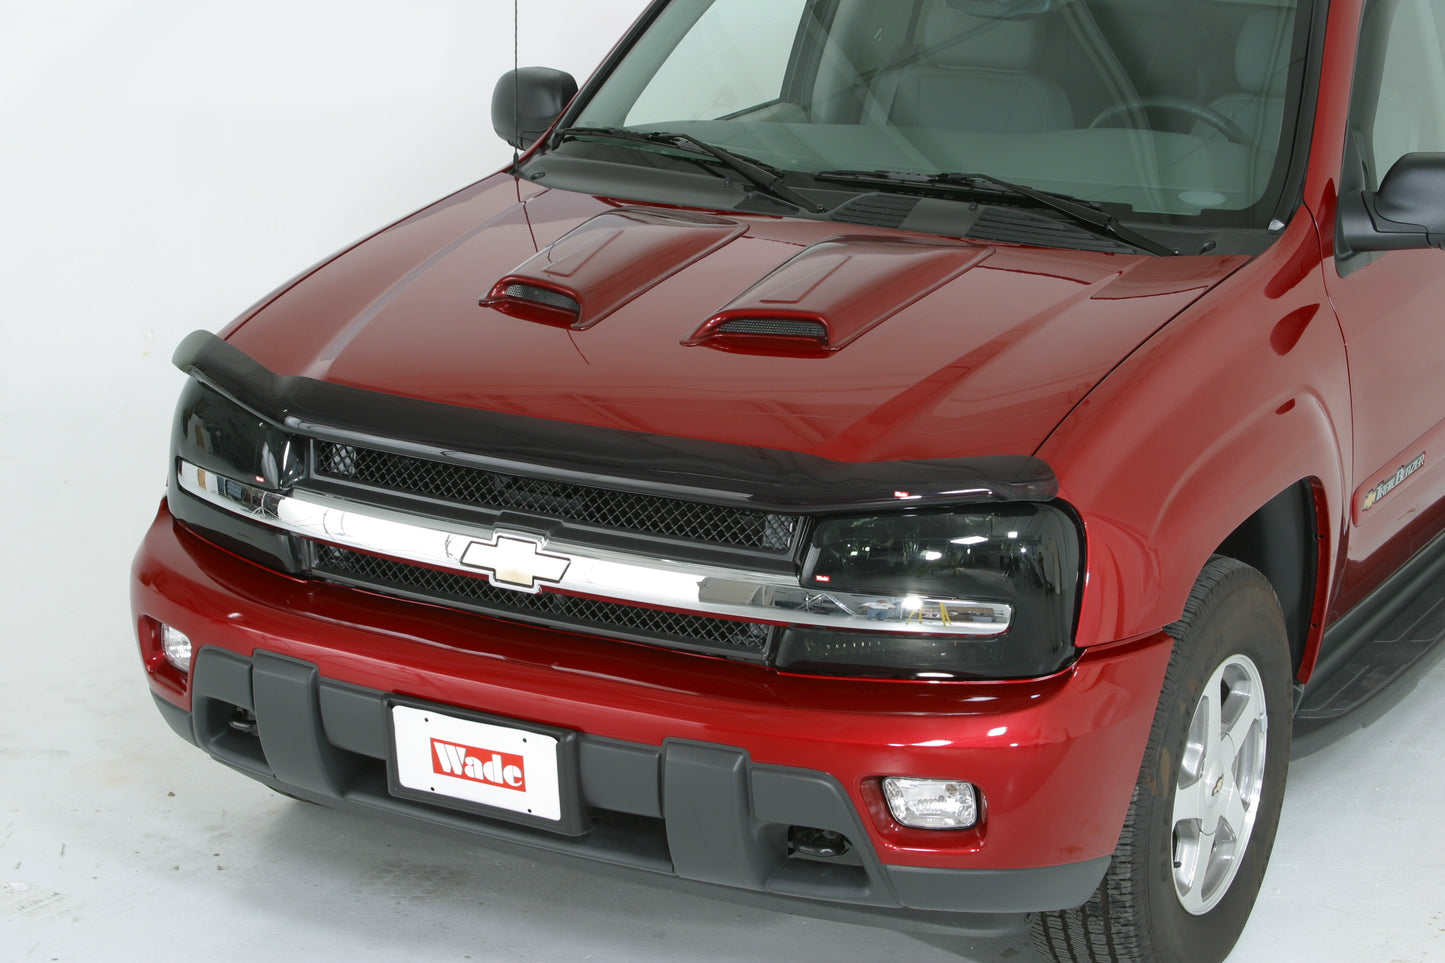 2004 Ford F-Series Head Light Covers